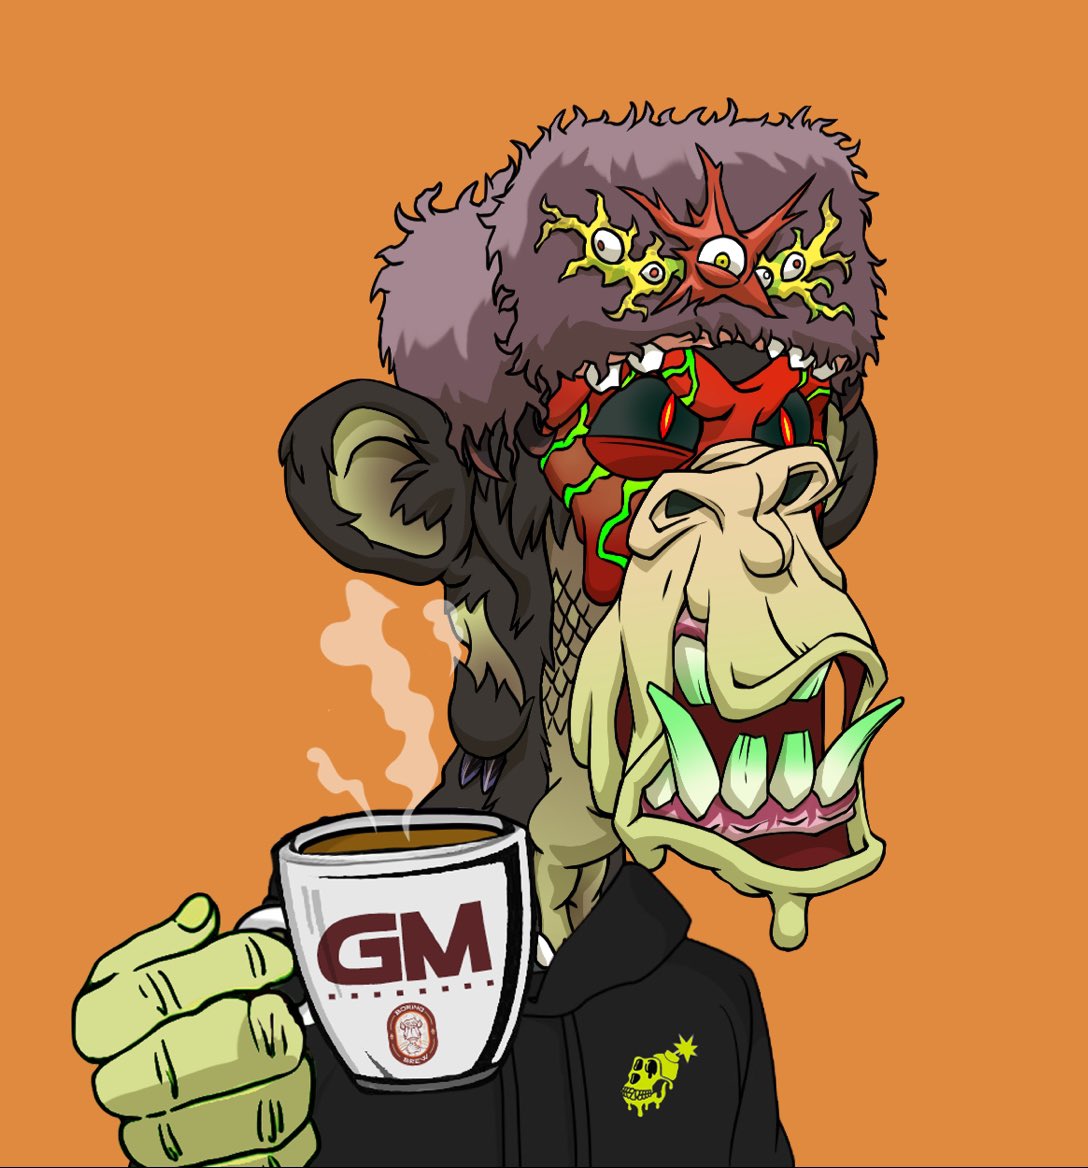 GM everyone 🌞☕️

Let’s start the grind #MutantMonday 🧪🦍